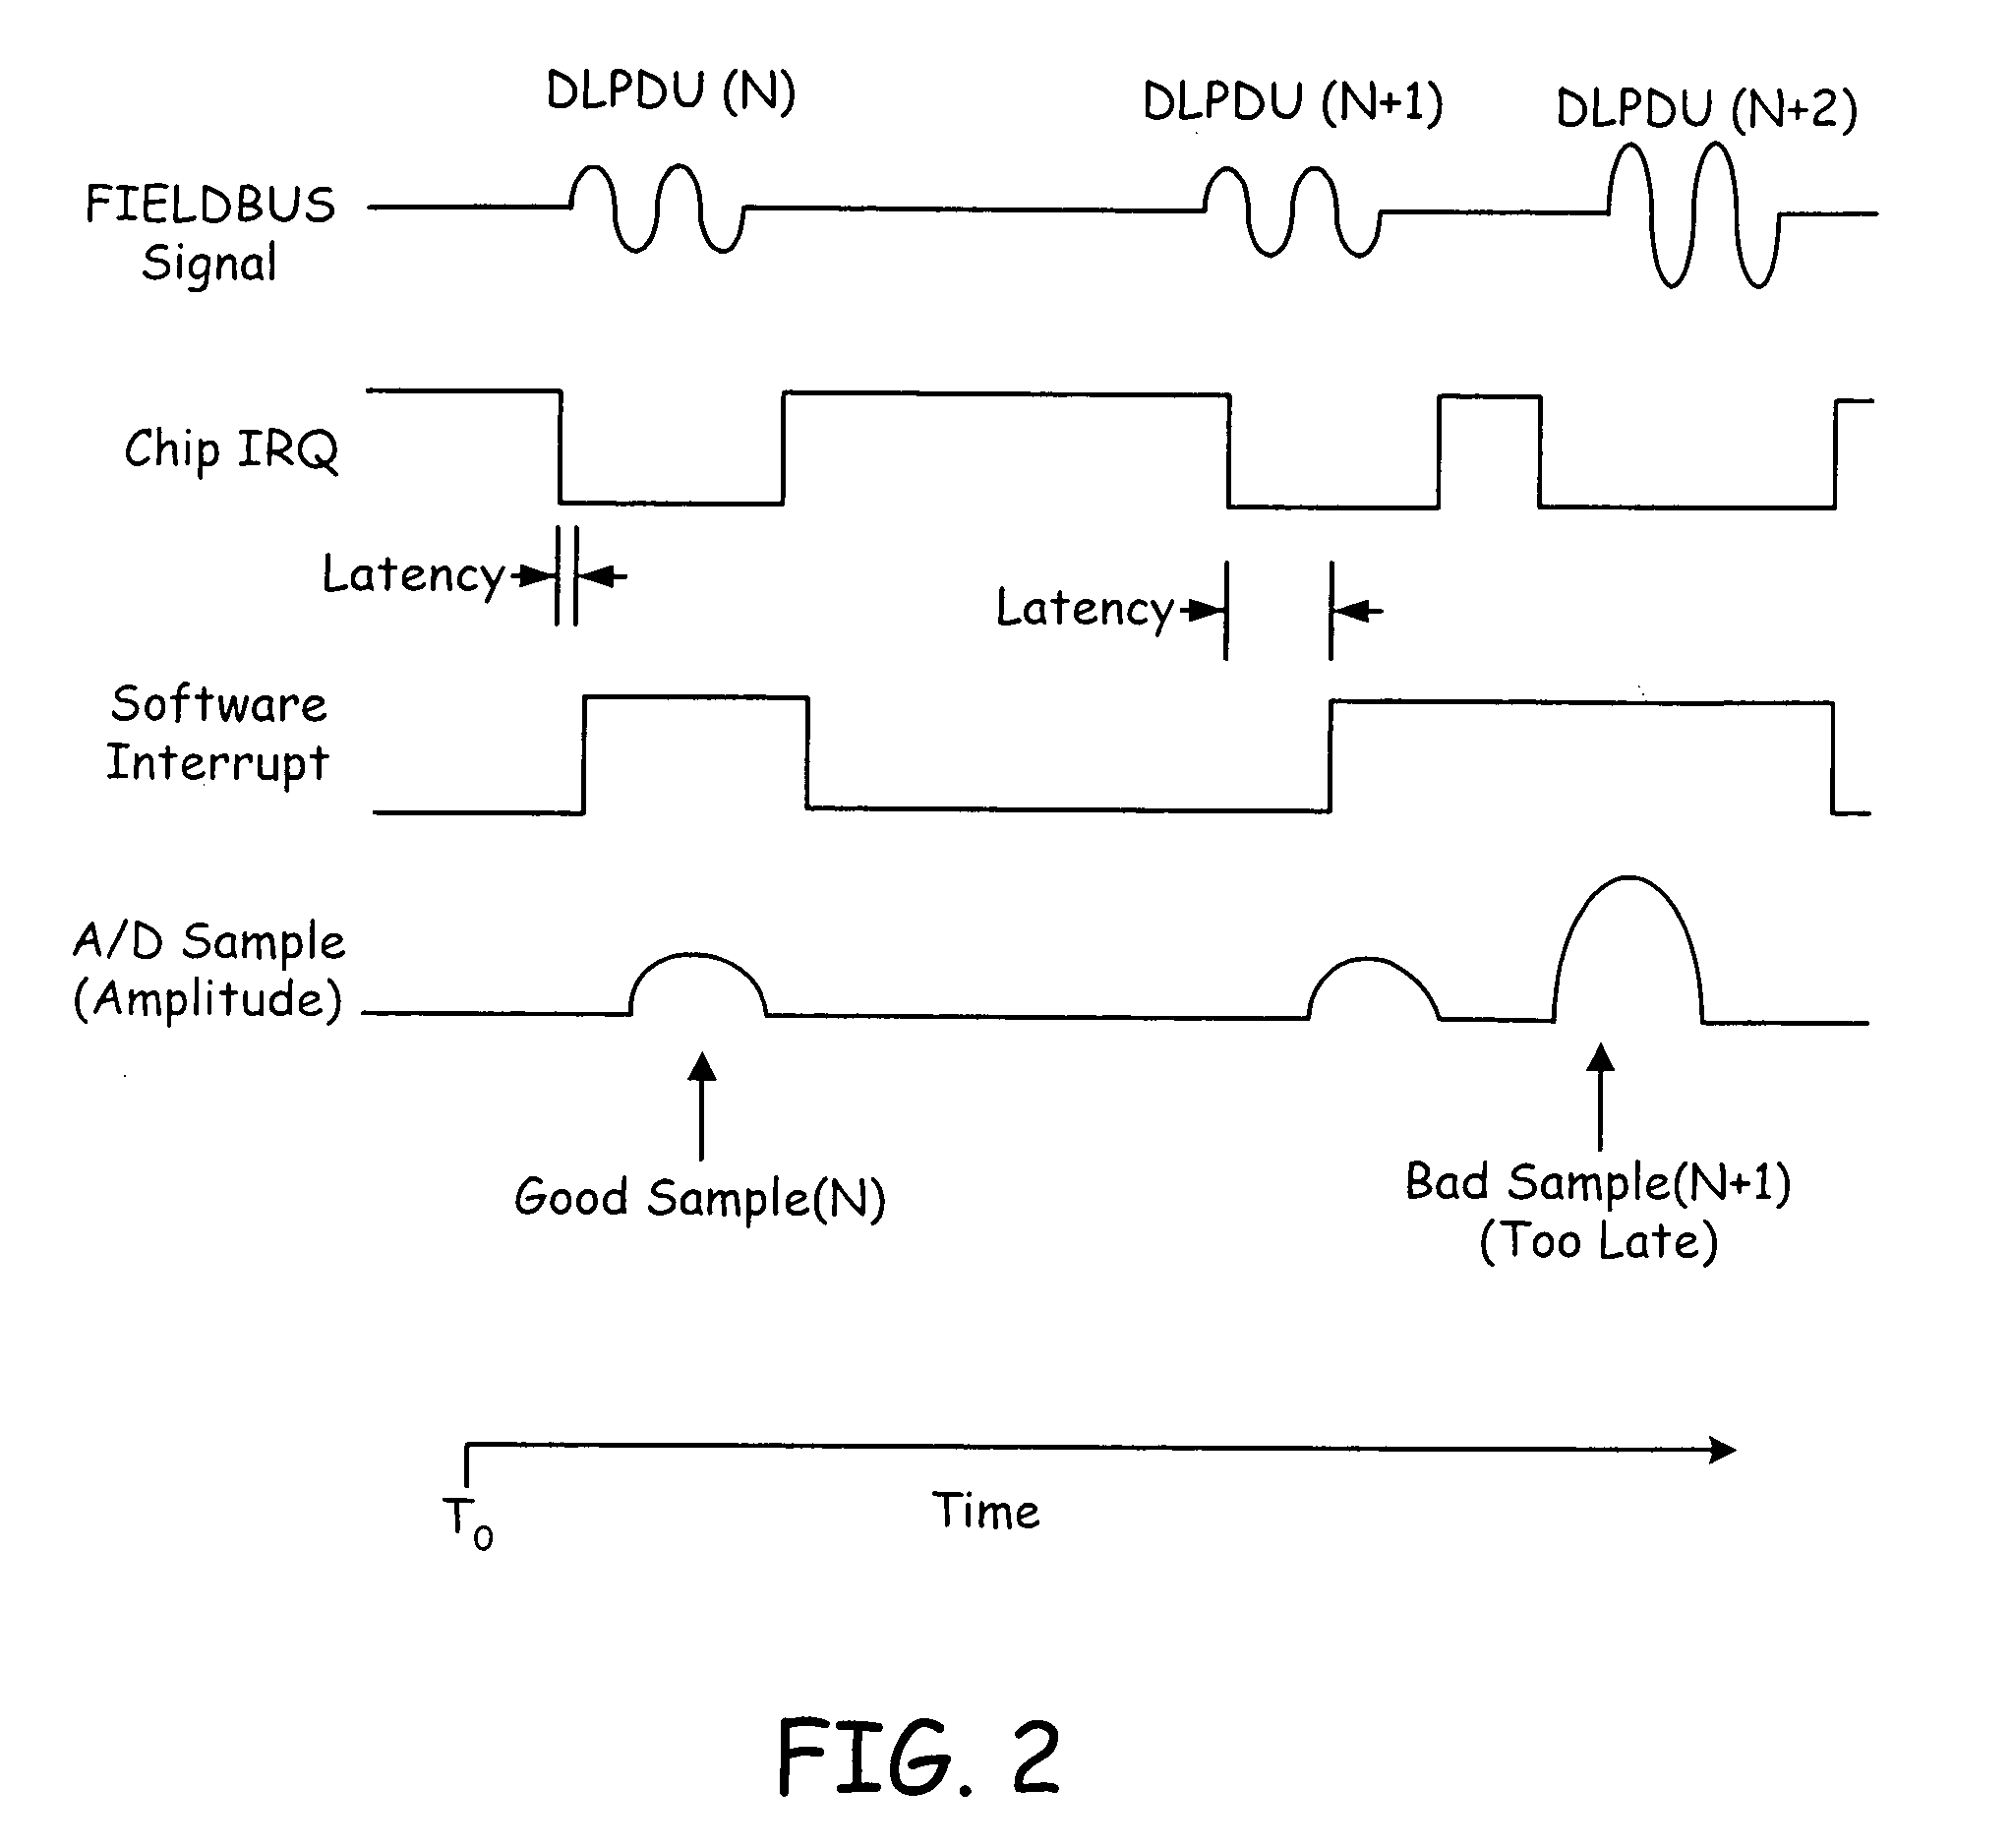 System and method for associating a DLPDU received by an interface chip with a data measurement made by an external circuit